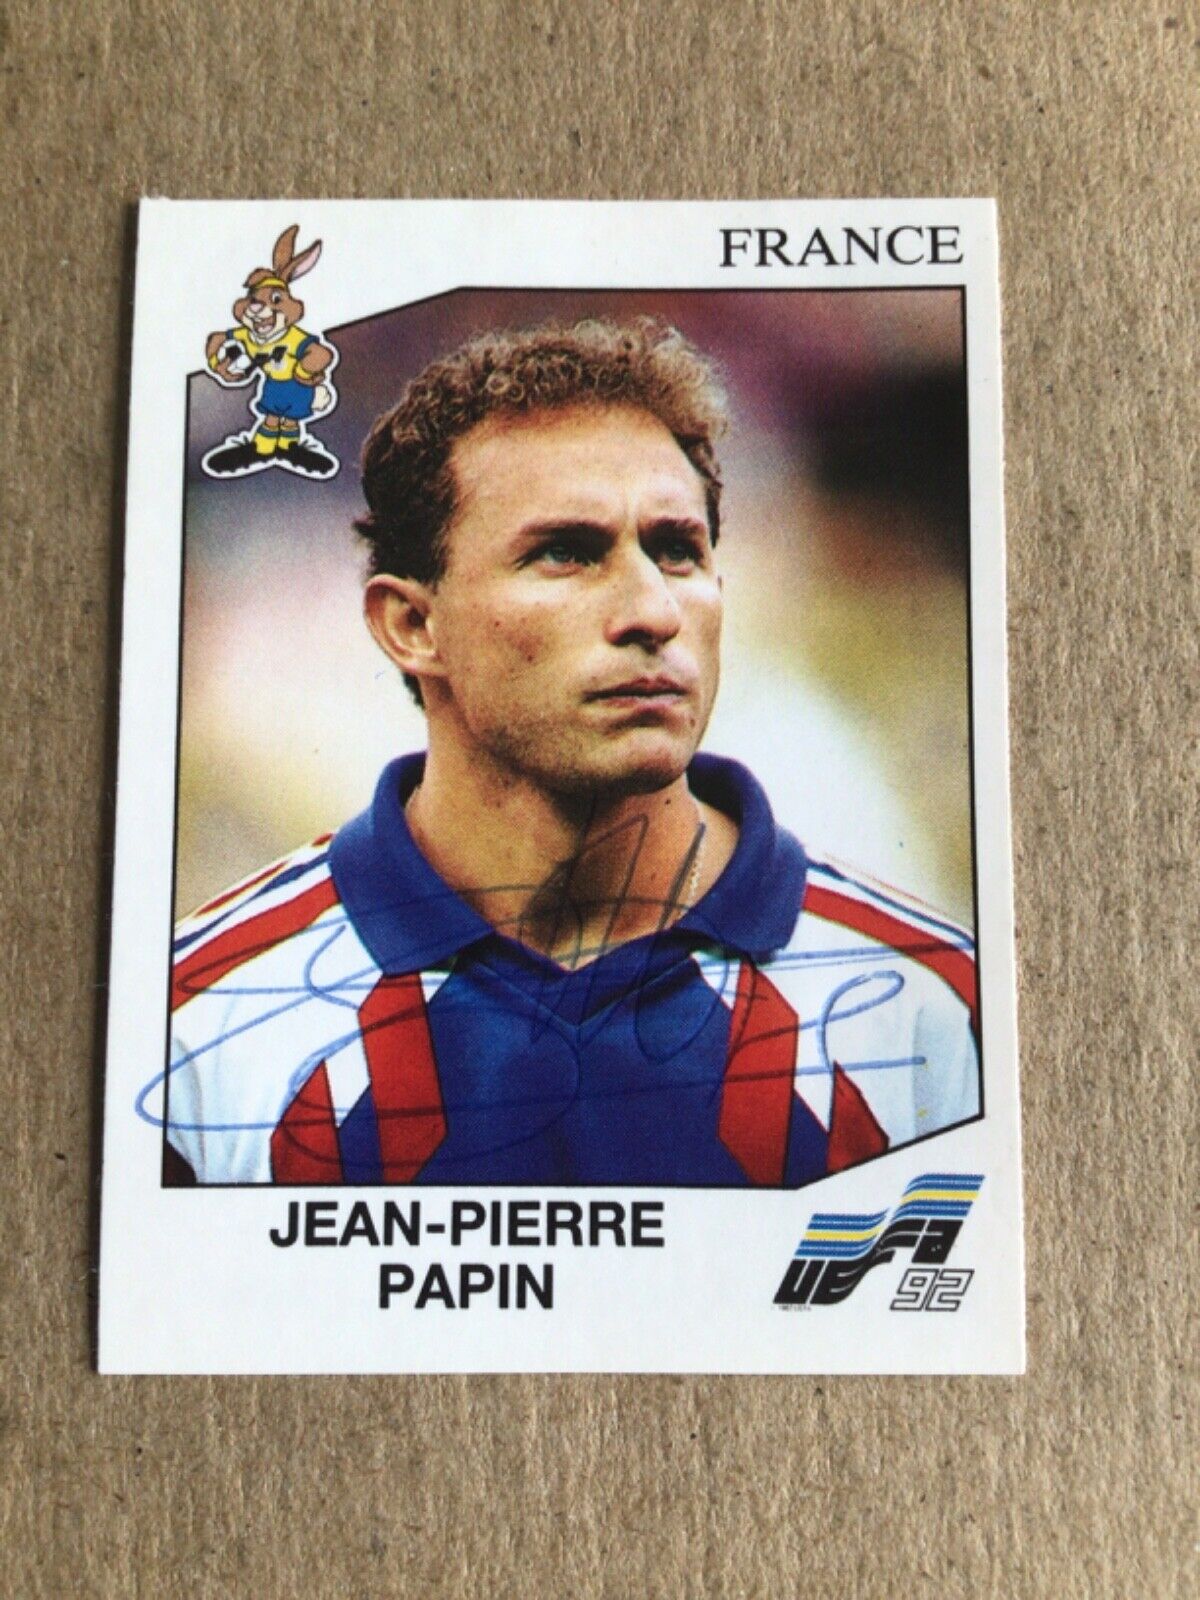 Jean-Pierre Papin, France 🇫🇷 UEFA Euro 1992 Panini hand signed